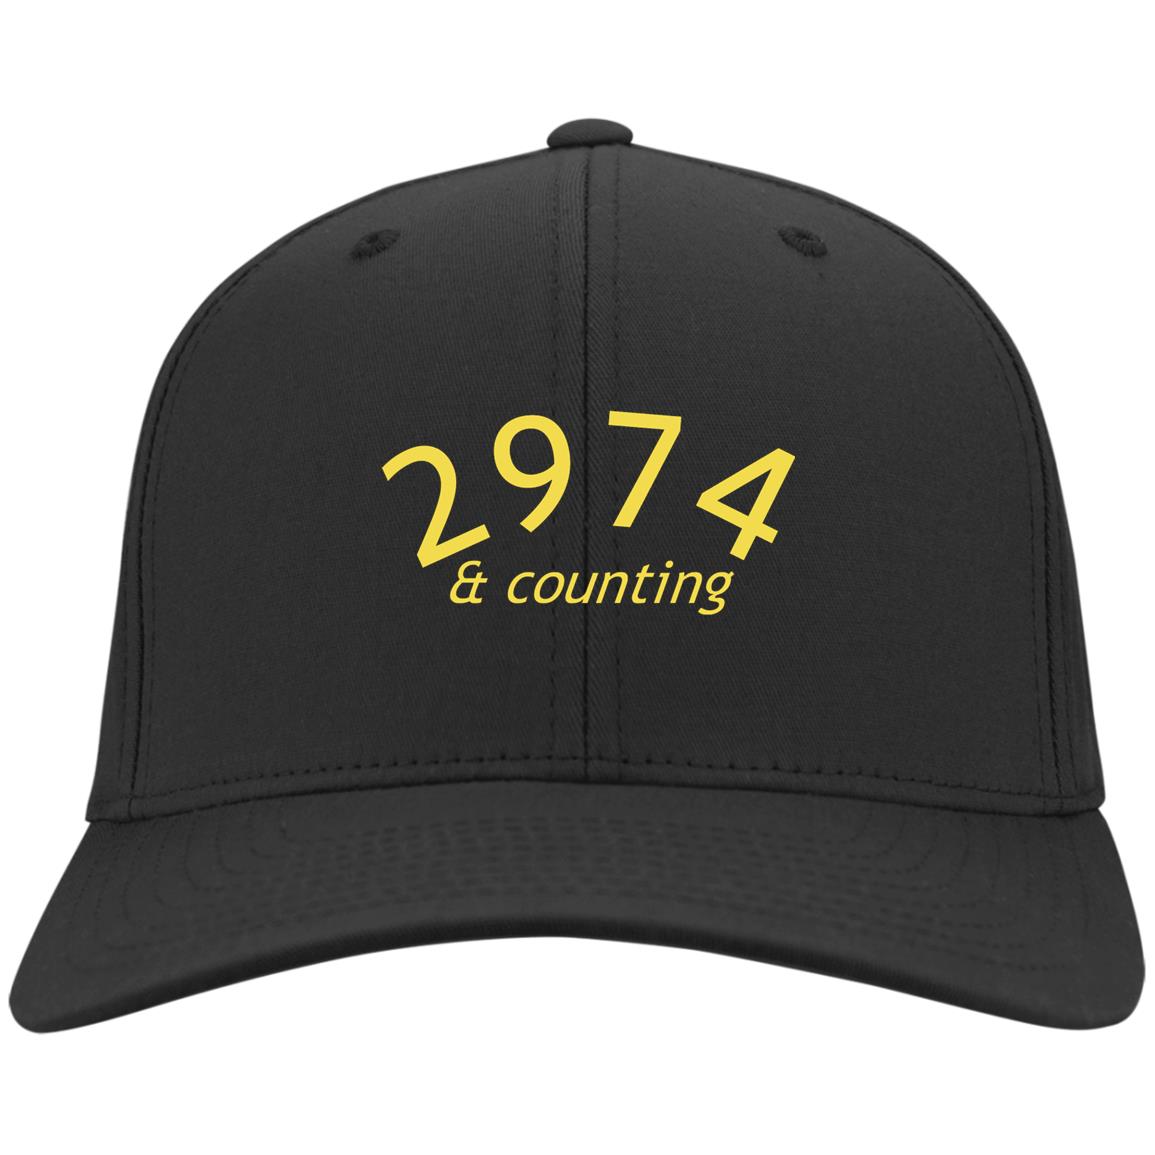 2974 And Counting hat